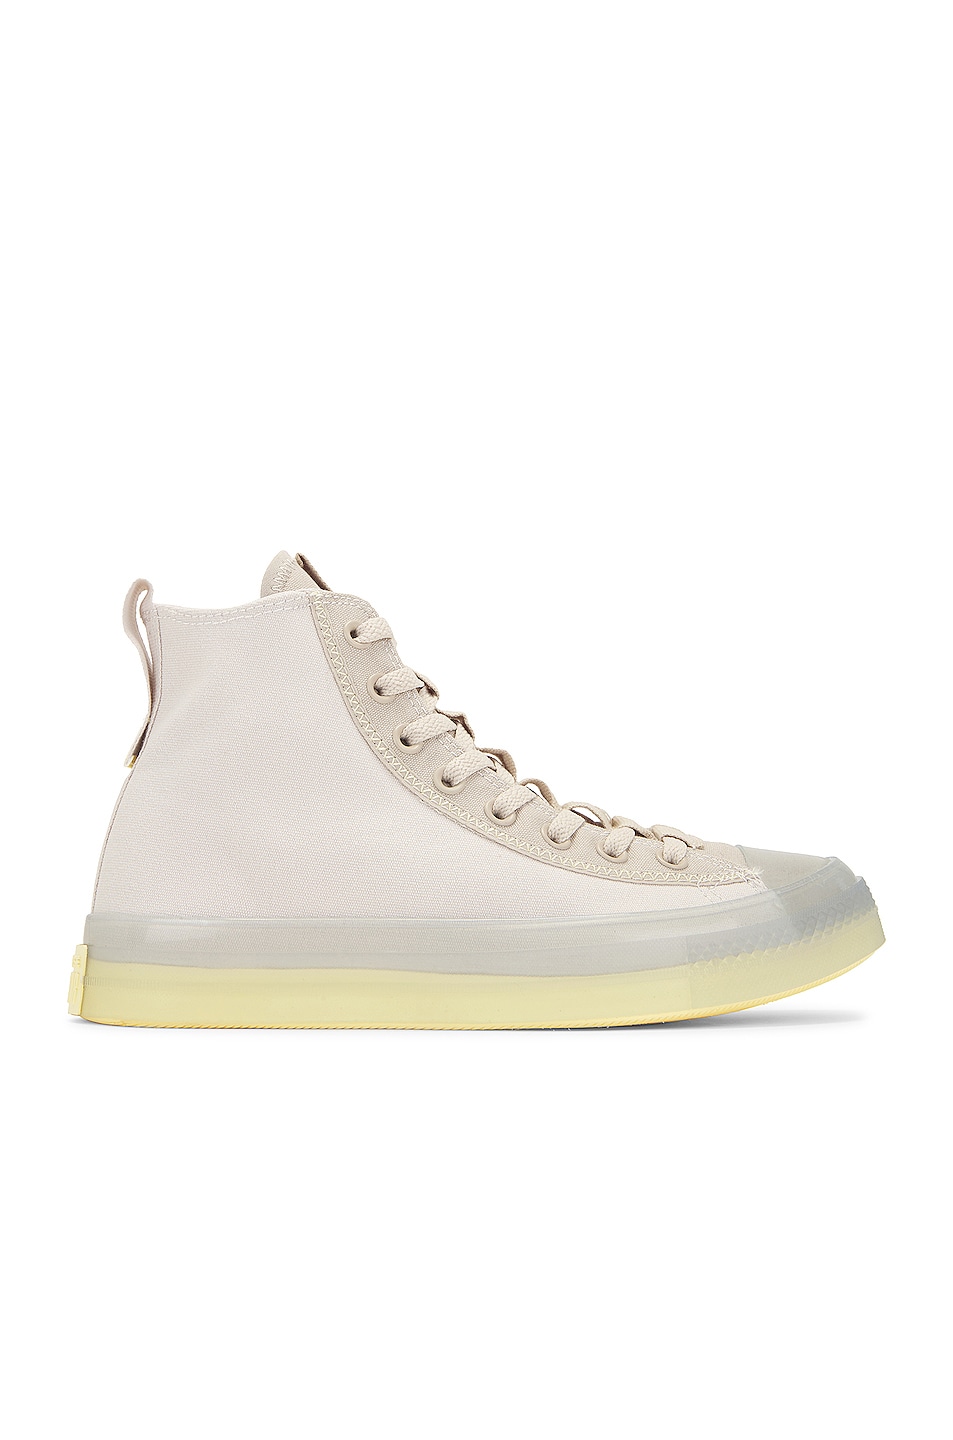 Image 1 of Converse Chuck Taylor All Star CX Desert Sunset in Pale Putty, Papyrus, & Soft Sunshine